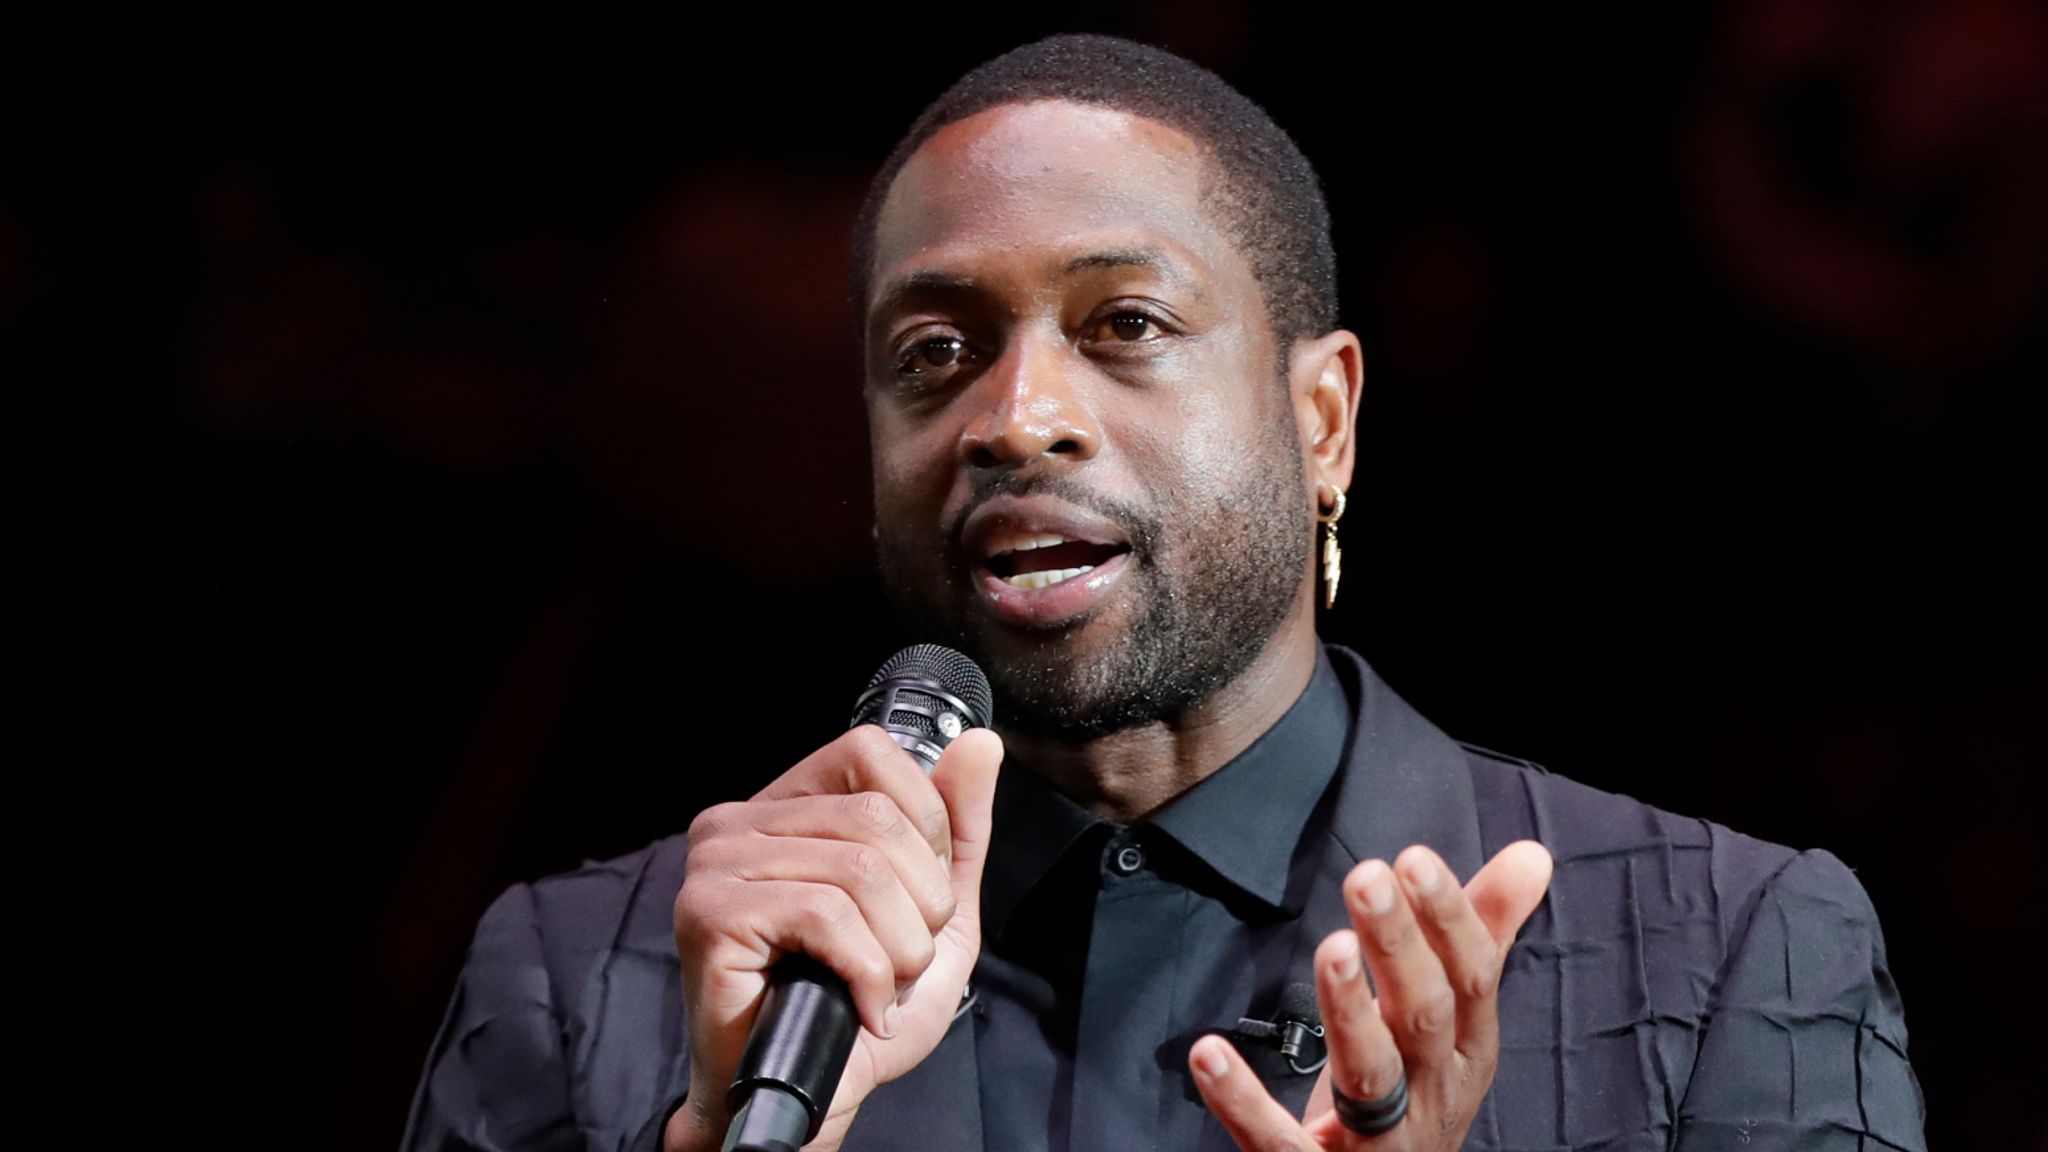 Dwyane Wade Describes Transition From NBA Player to Owner